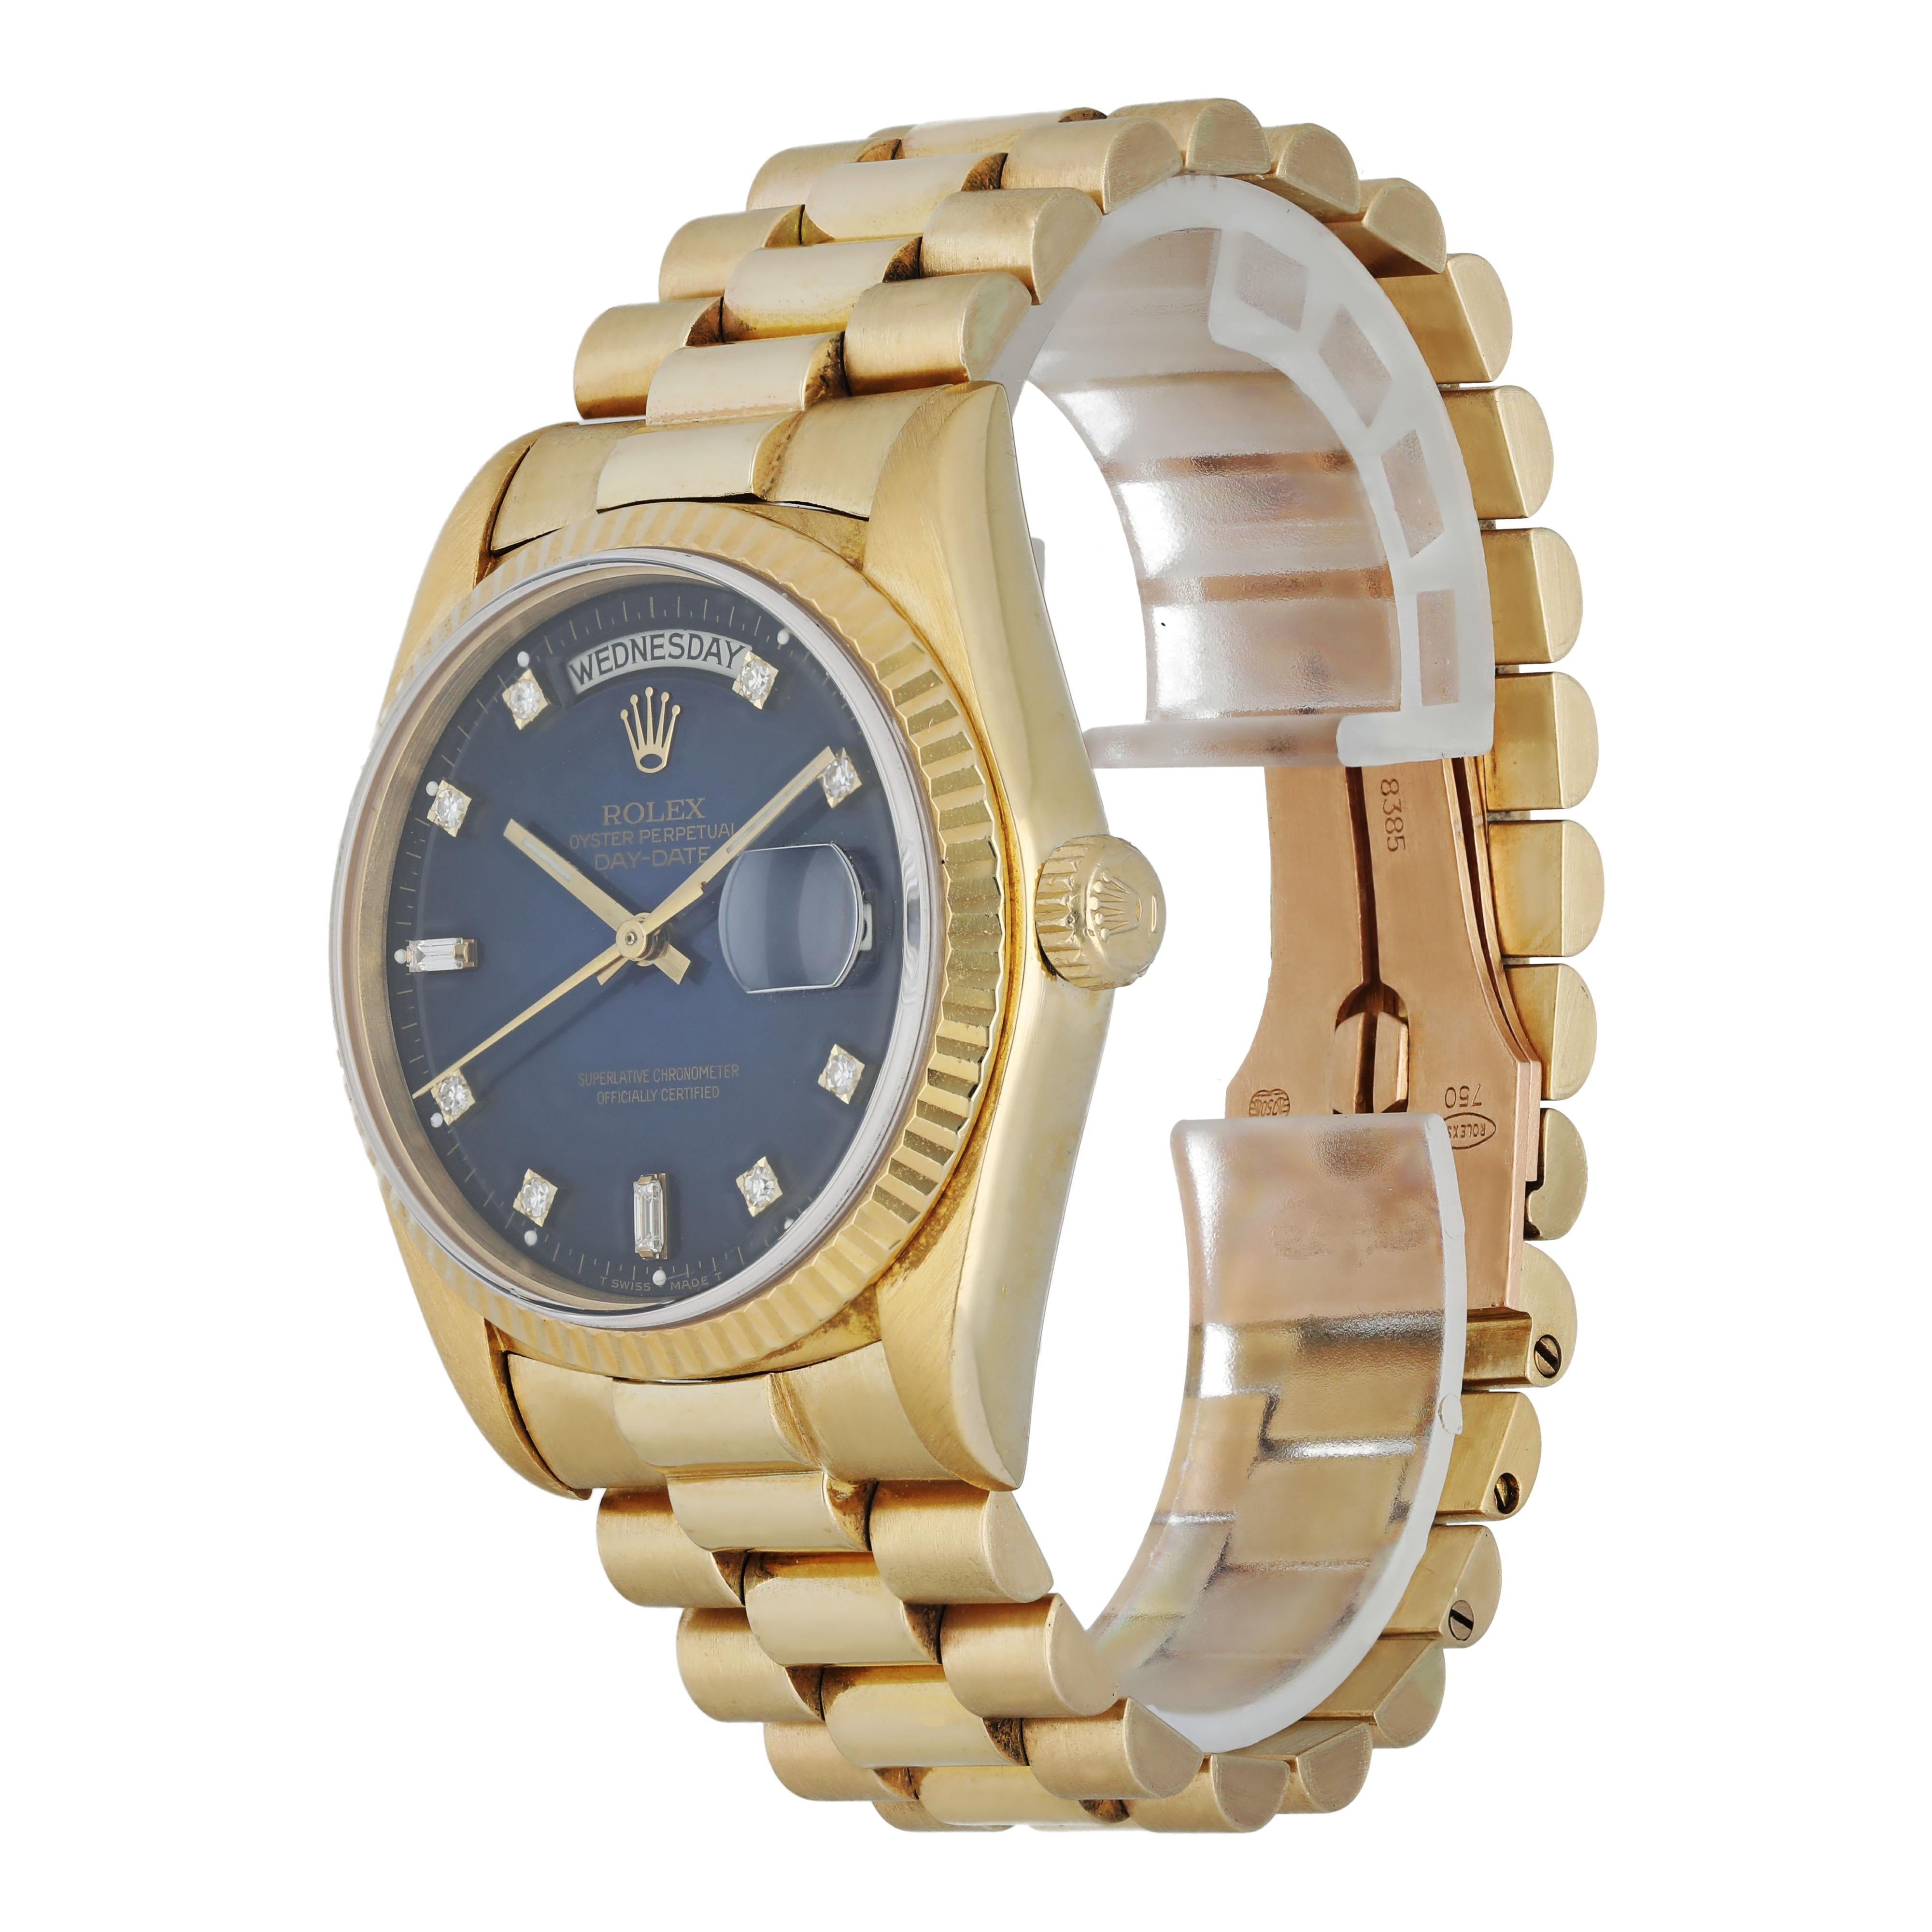 Rolex Day-Date President 18038 Yellow Gold Men's Watch.
36mm 18k Yellow gold case. 
Yellow Gold fluted bezel. 
Blue vignette dial with gold luminous hands and factory set diamond hour markers. 
Minute markers on the outer dial. 
Date display at the